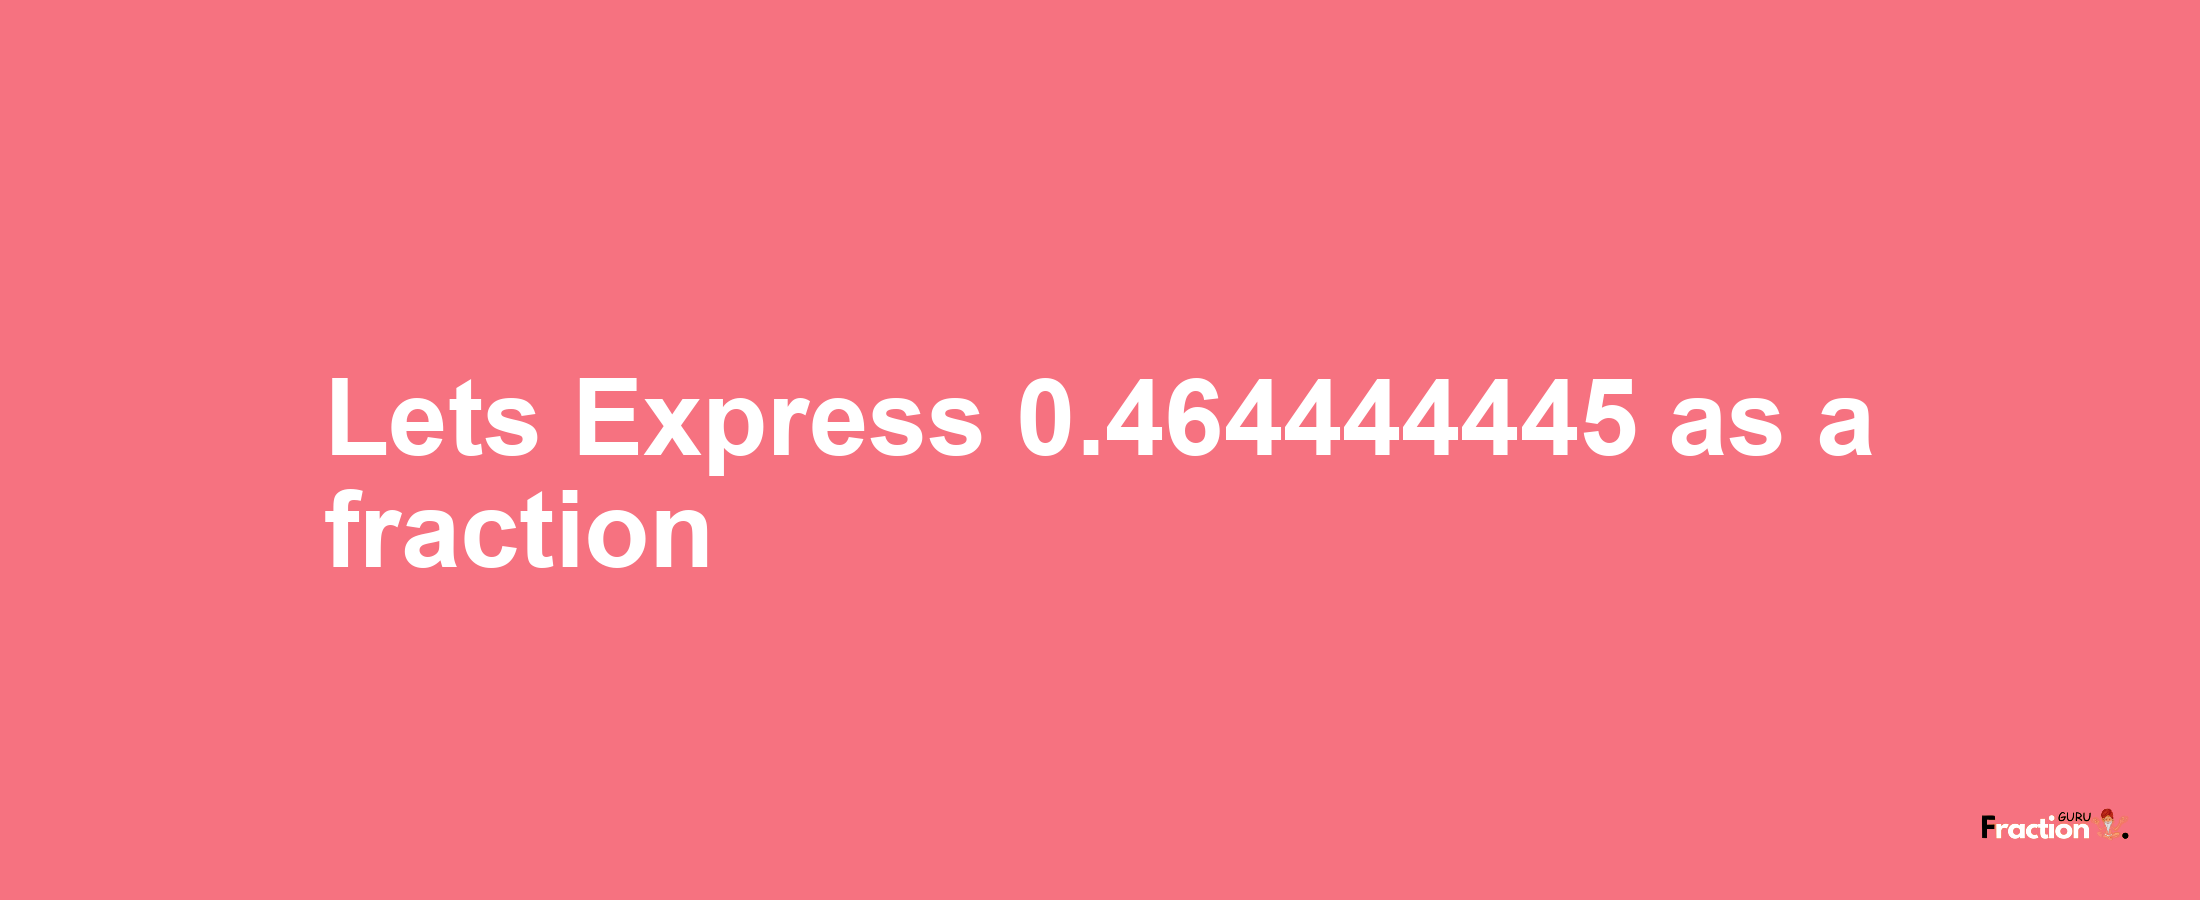 Lets Express 0.464444445 as afraction